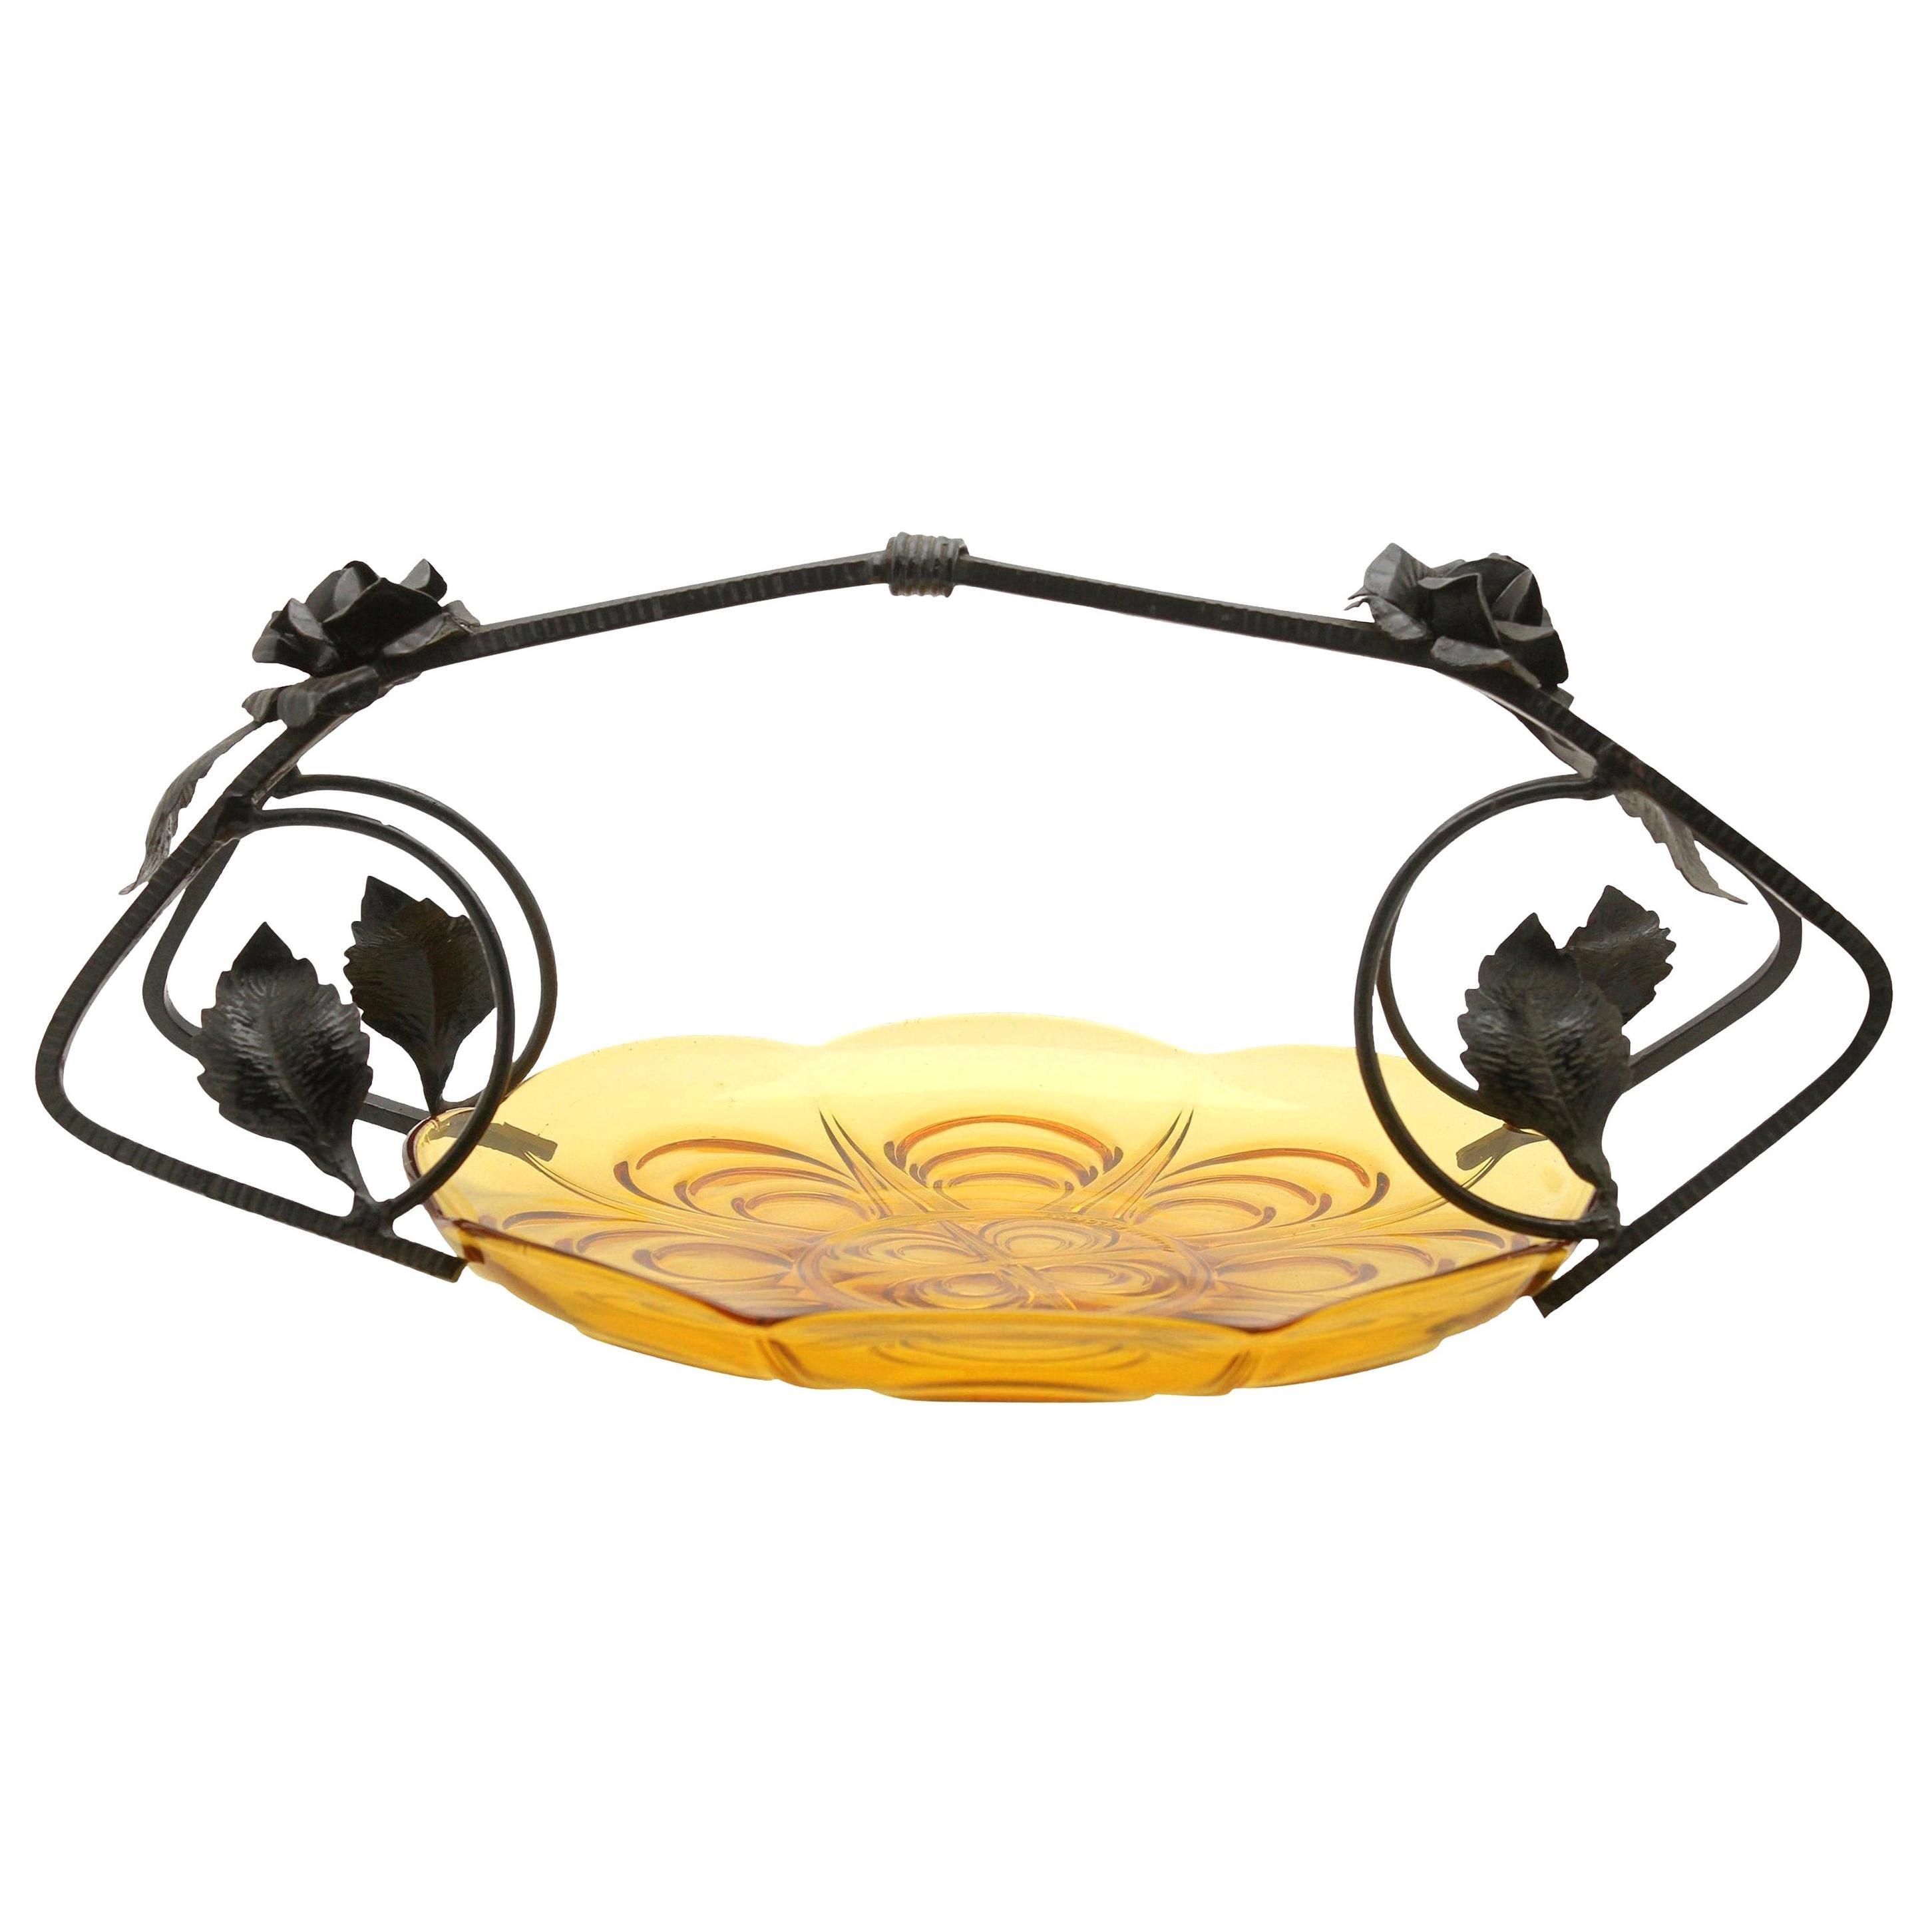 Art Deco Gateau Set, Pressed Glass Dish with Handle or Carrier in Wrought Iron